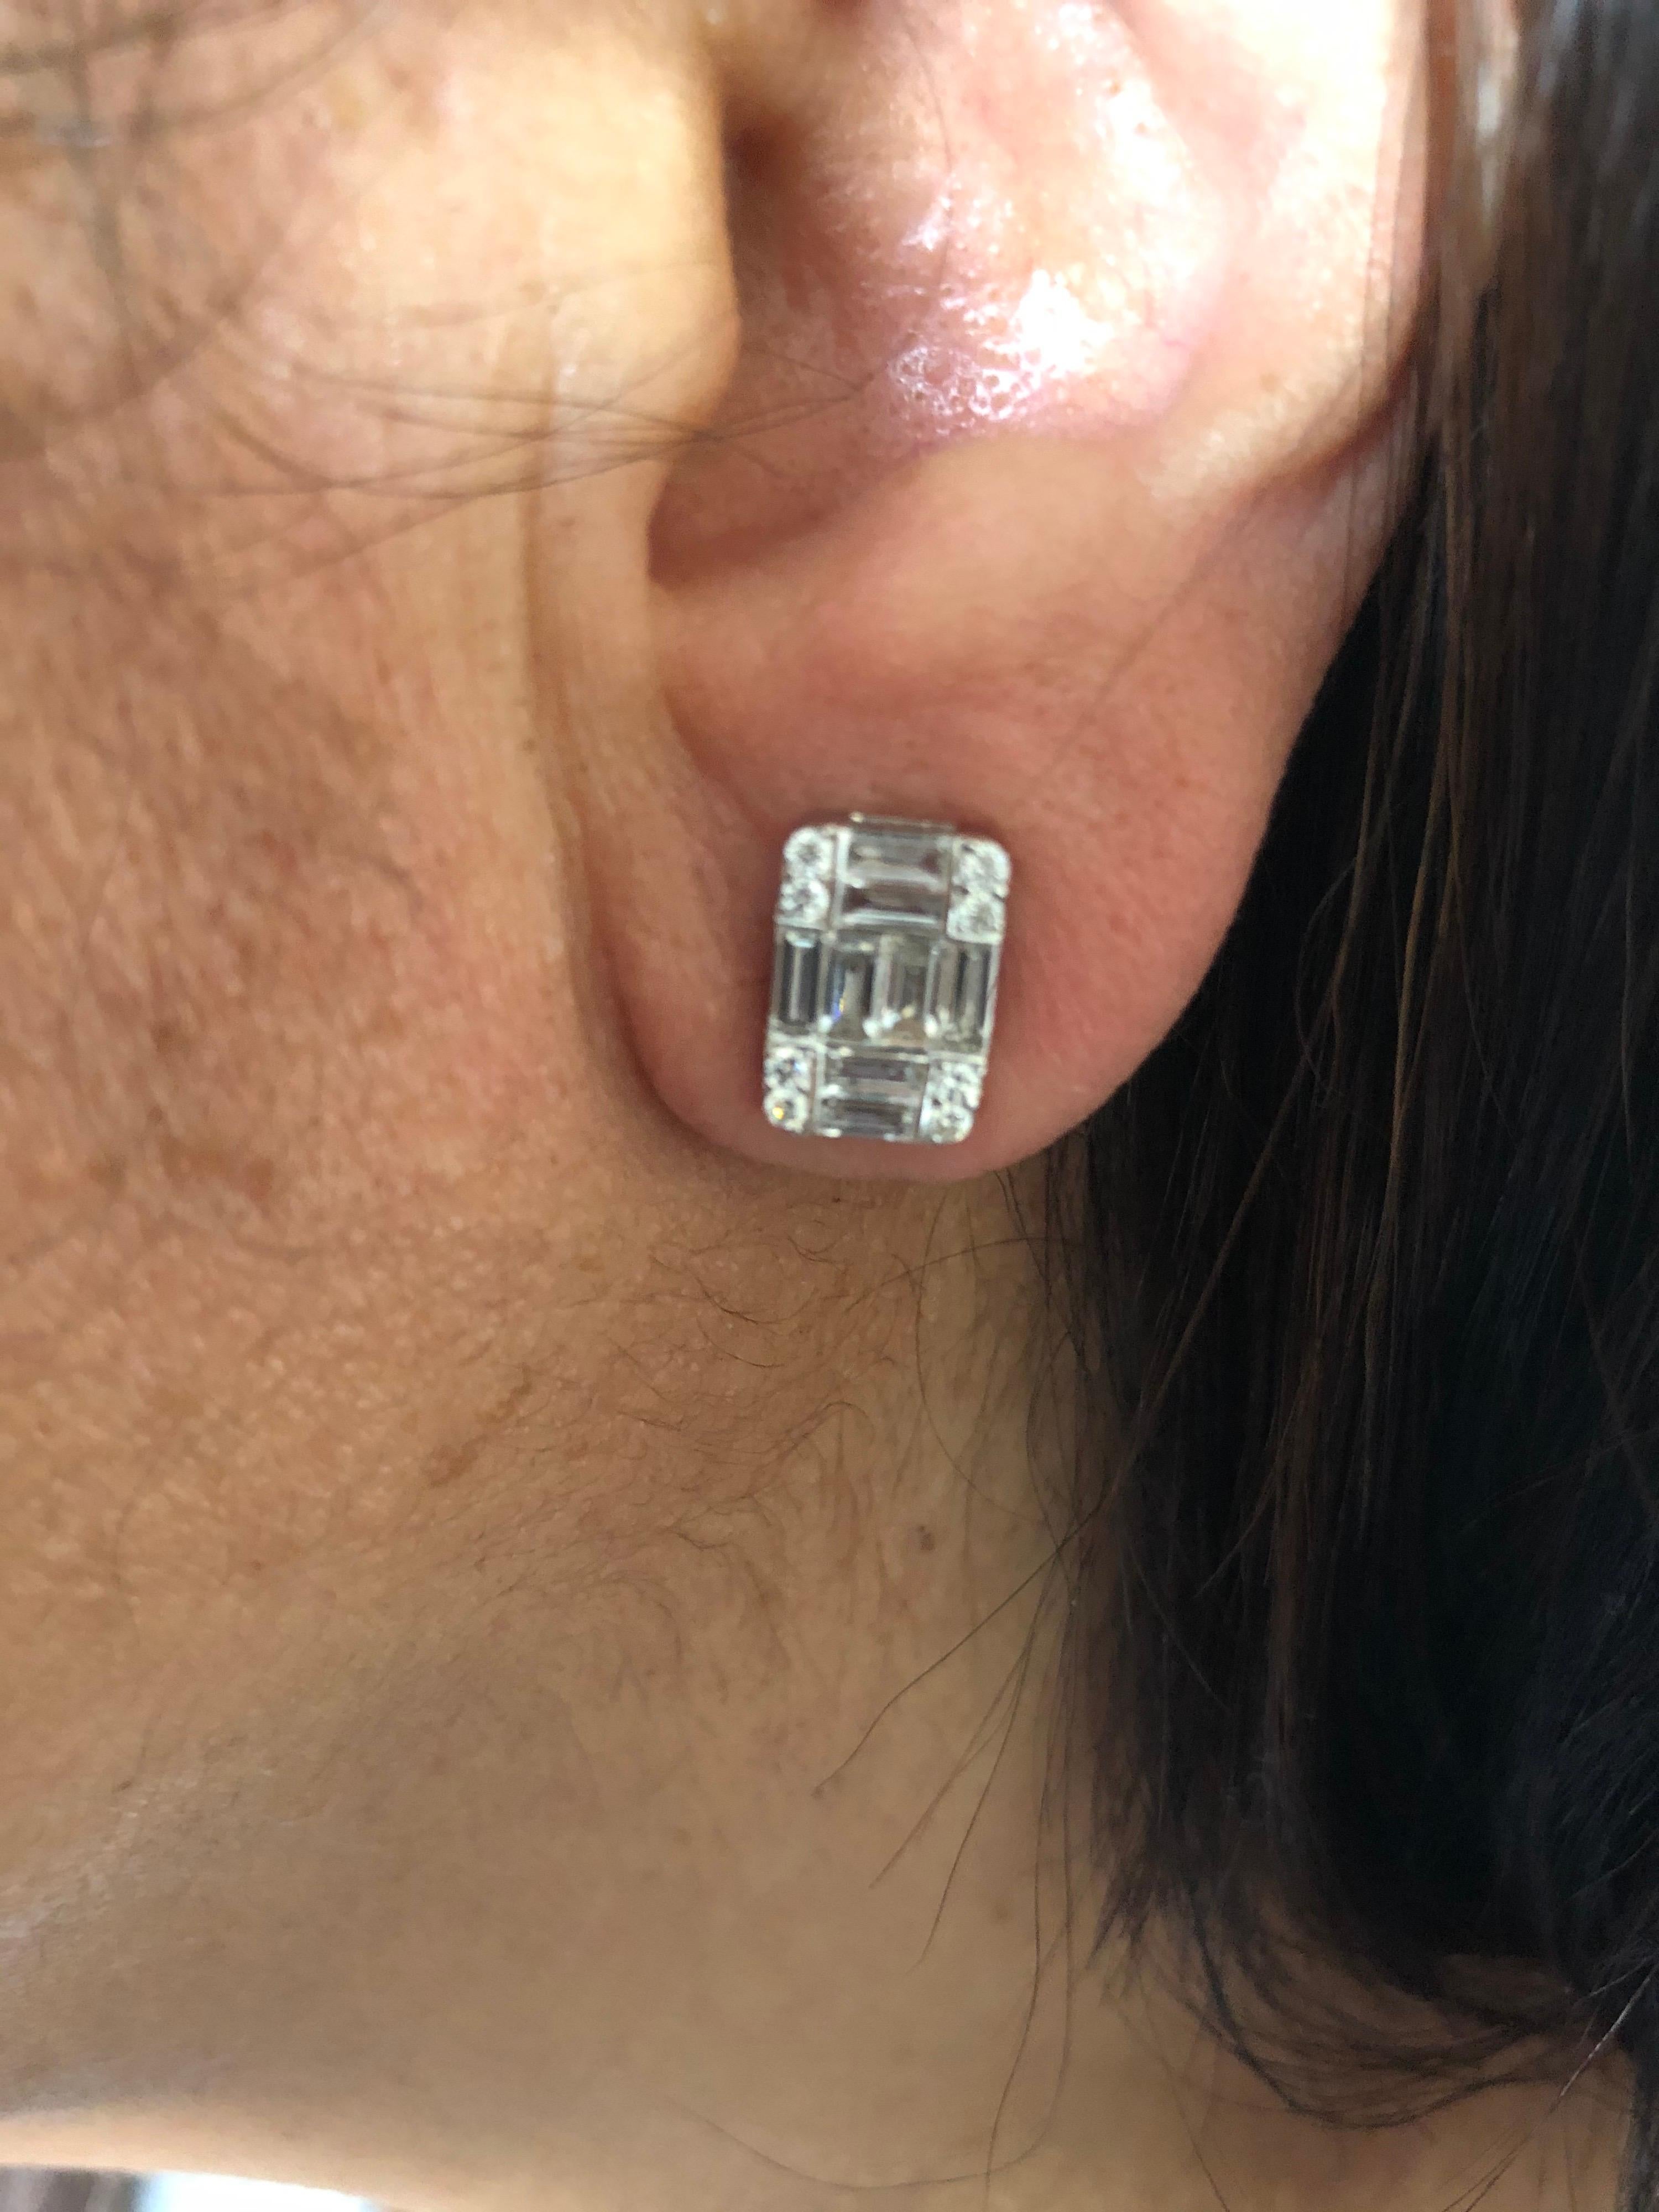 Emerald cut illusion earrings set in 18K white gold. The total carat weight of the earrings is 2.25 carats. The earrings are a cluster of baguette and round diamonds that create the illusion of a single emerald cut. The color of the stones are F,